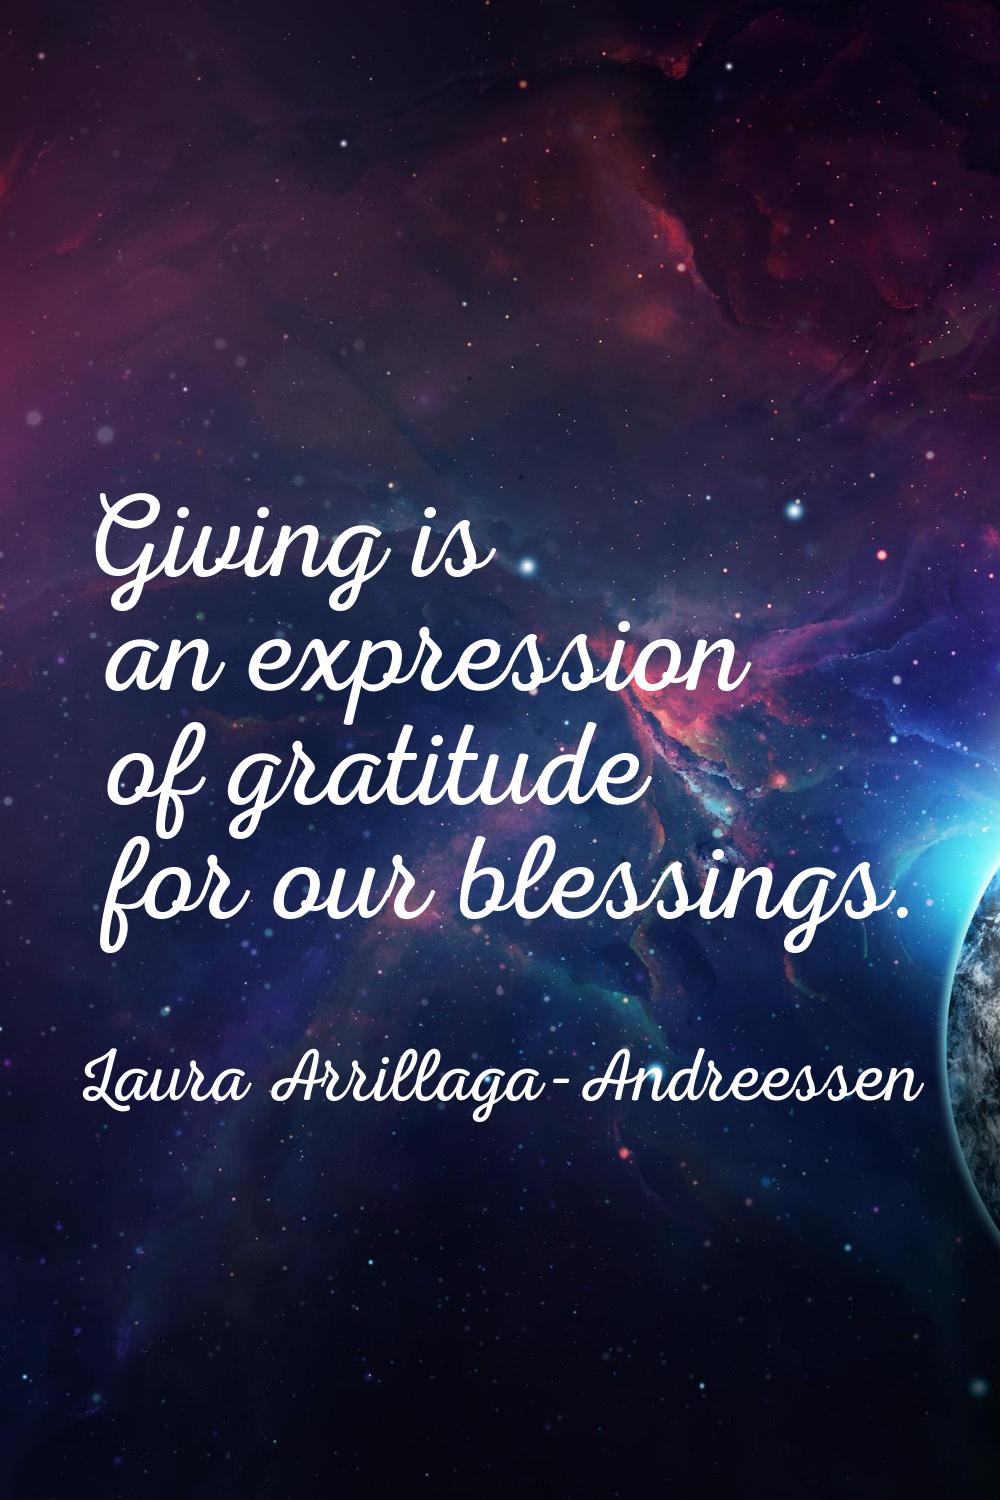 Giving is an expression of gratitude for our blessings.